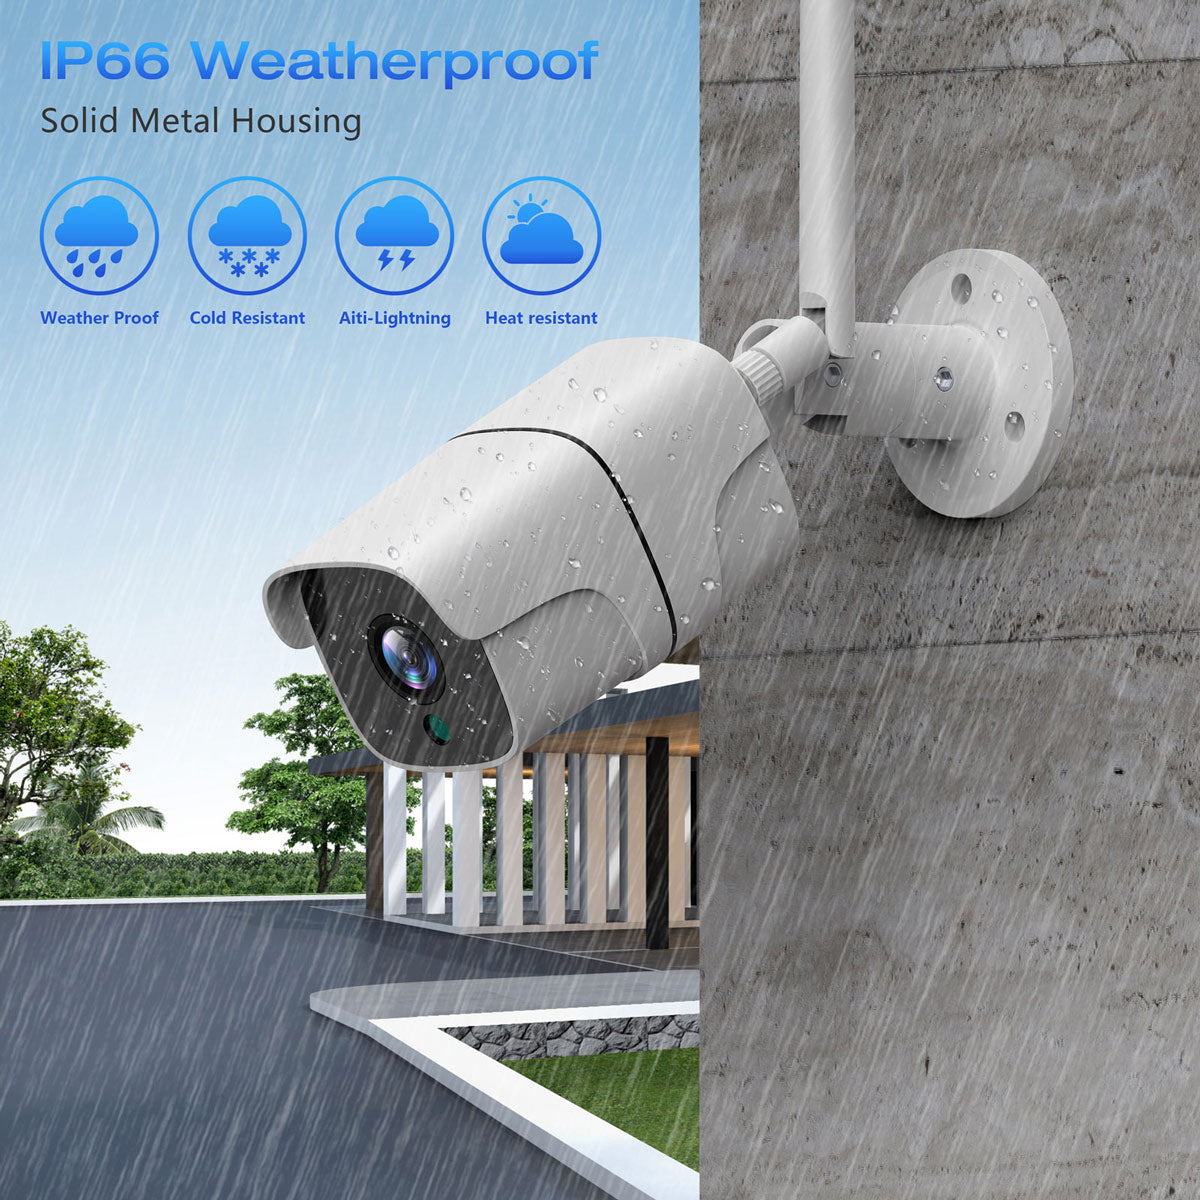 A Single Security Camera For Campark W300/W400 Security Camera System (Out of stock in Canada, Australia,Europe)